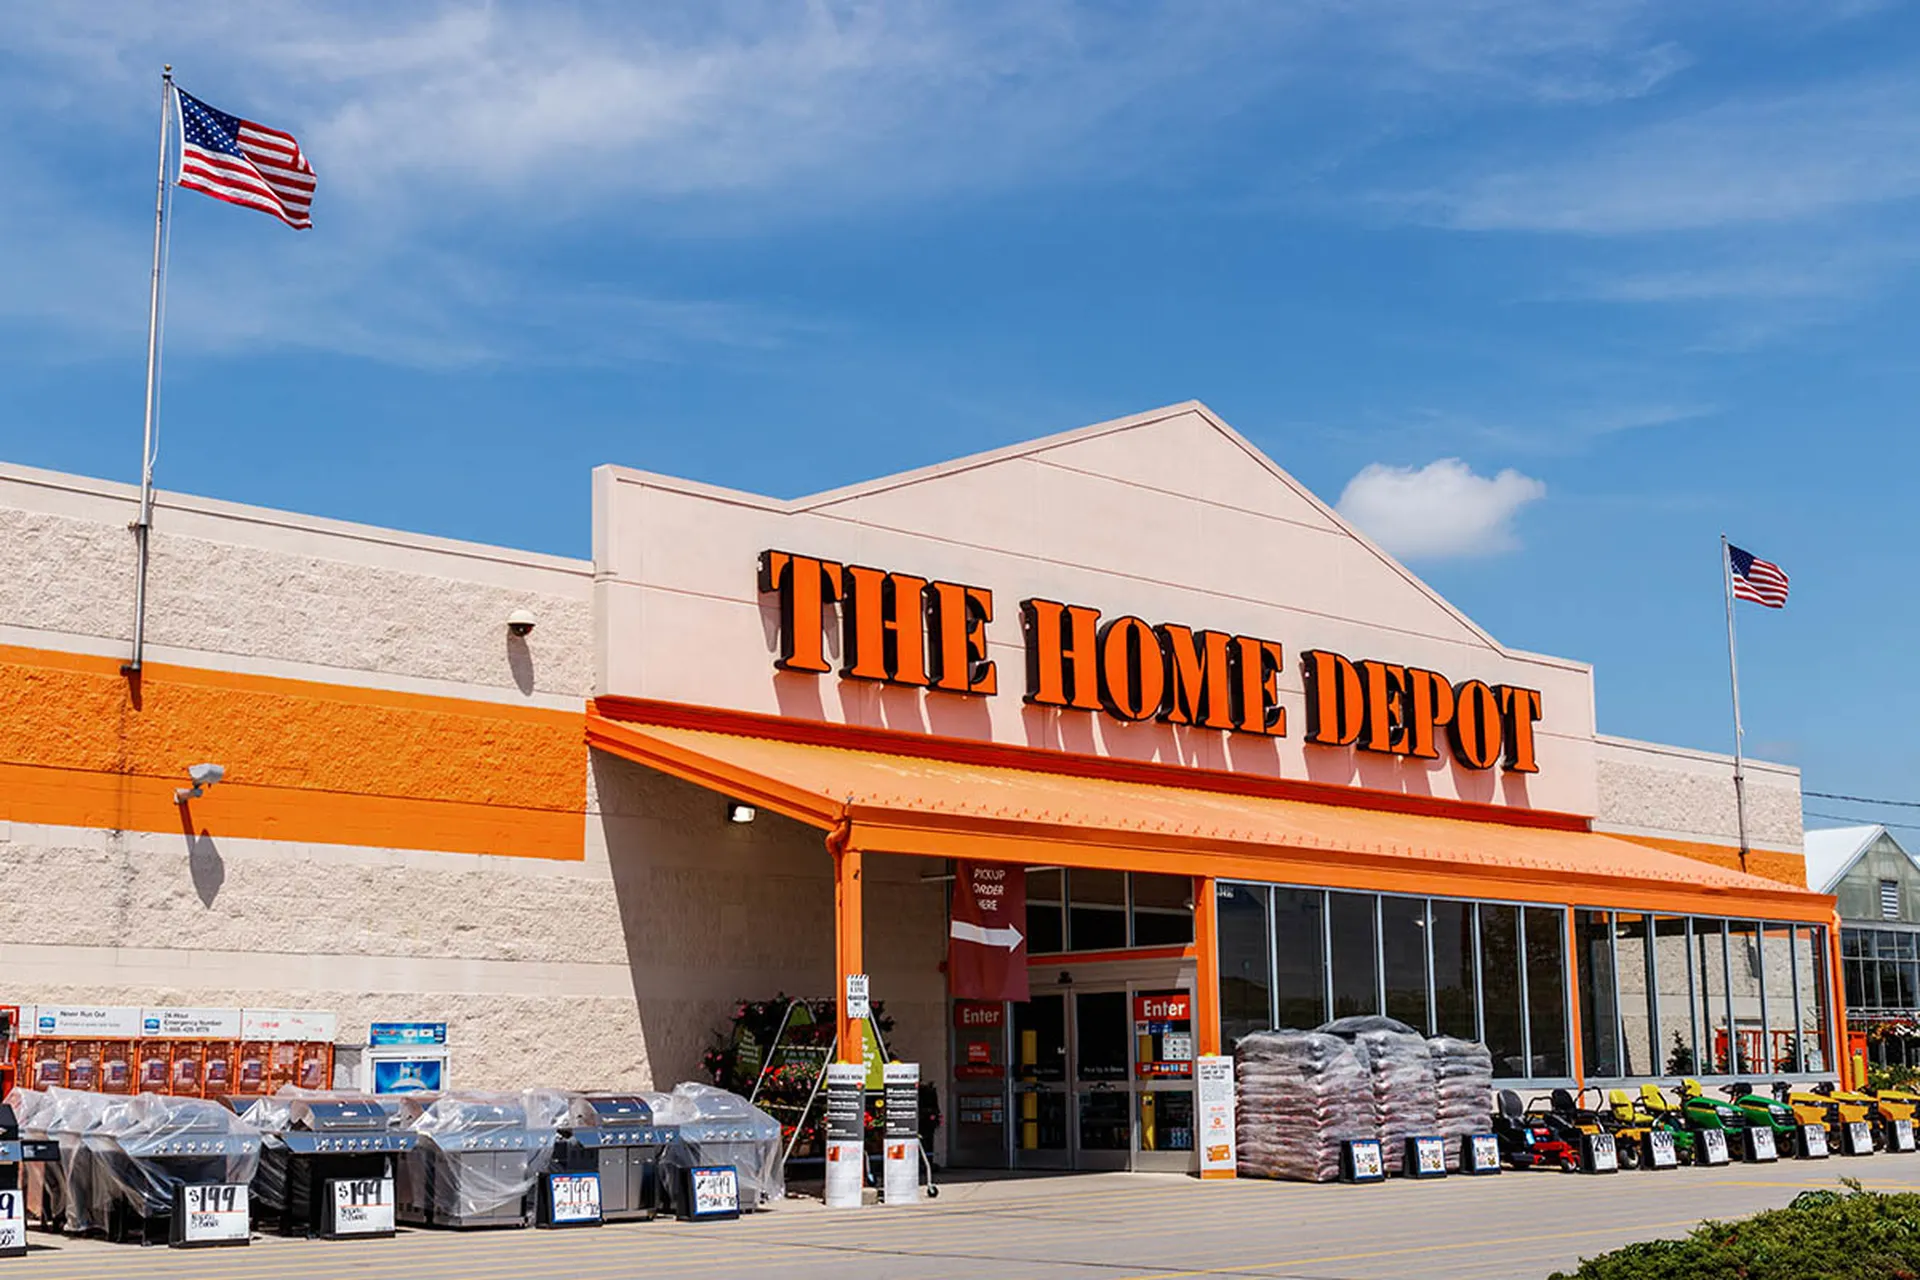 Home Depot is the Largest Home Improvement Retailer in the US